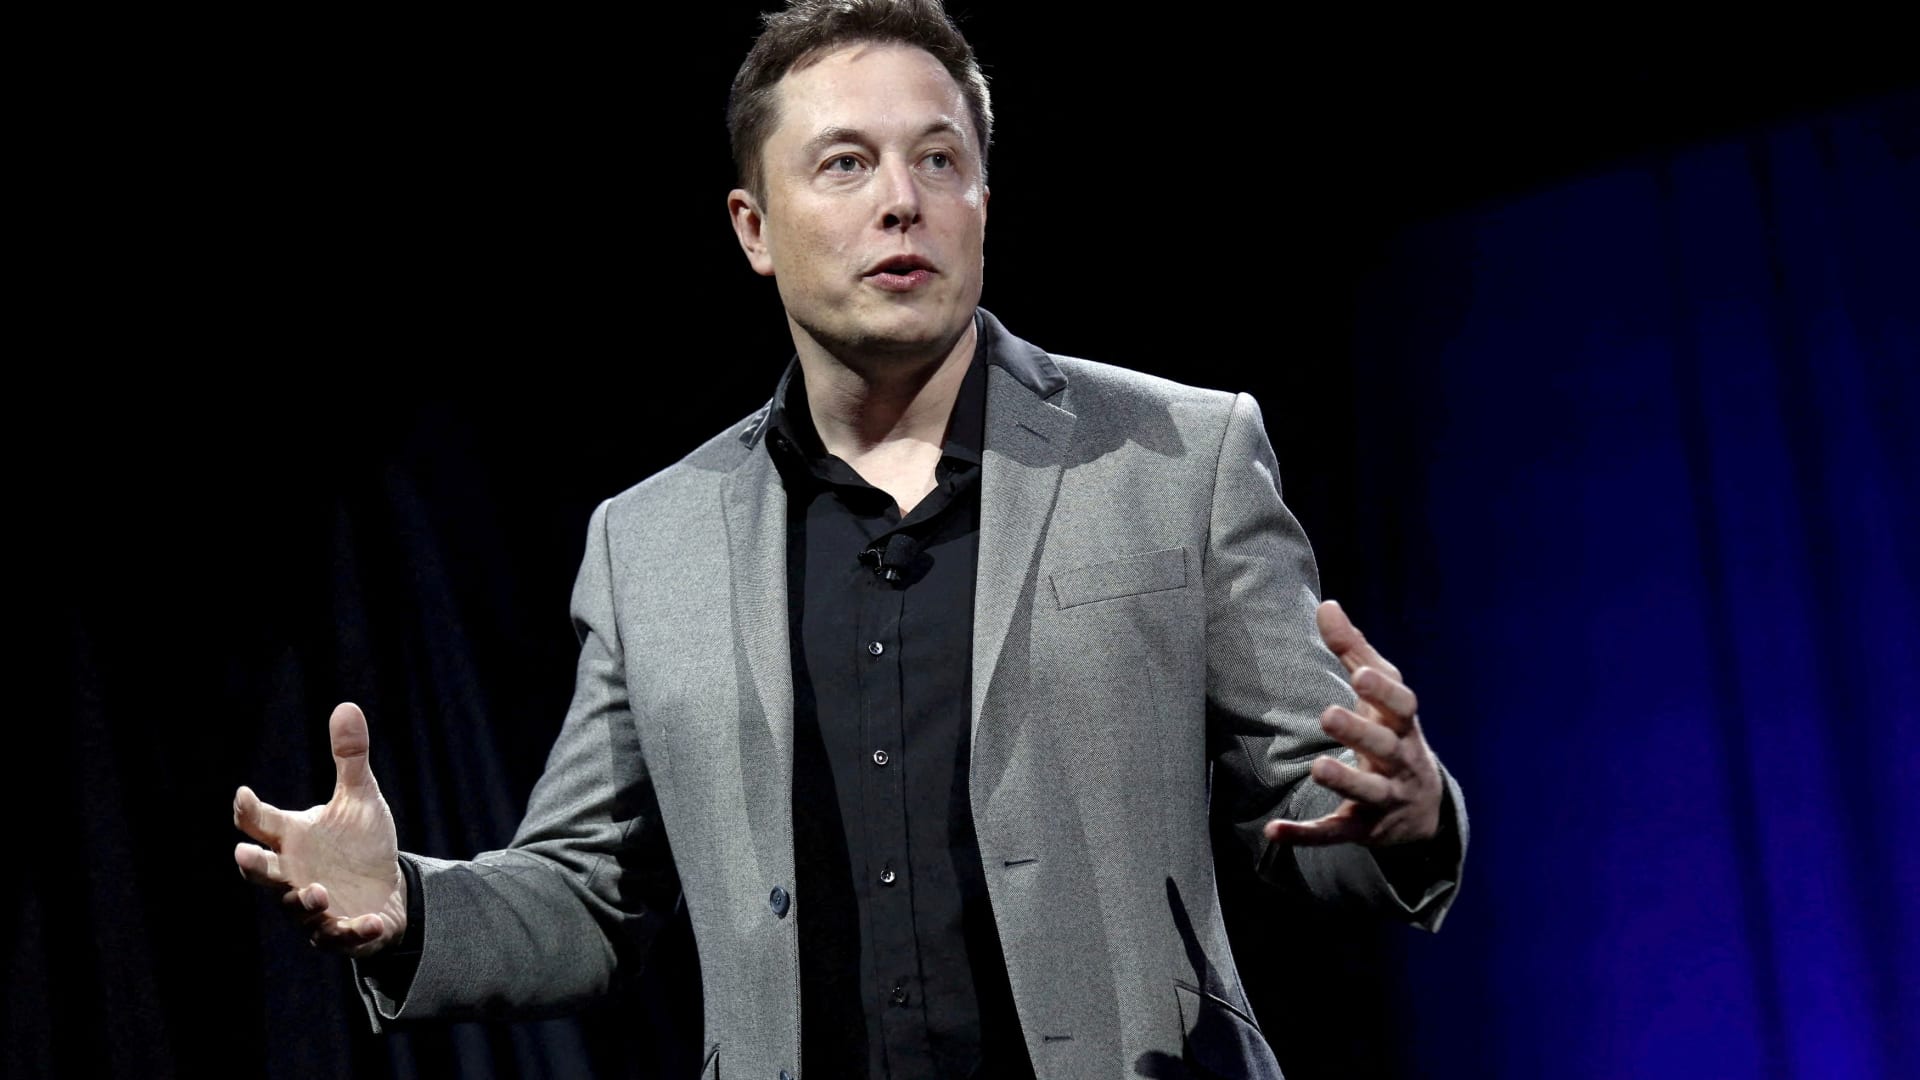 Elon Musk asks court to deny Twitter’s request for speedy trial